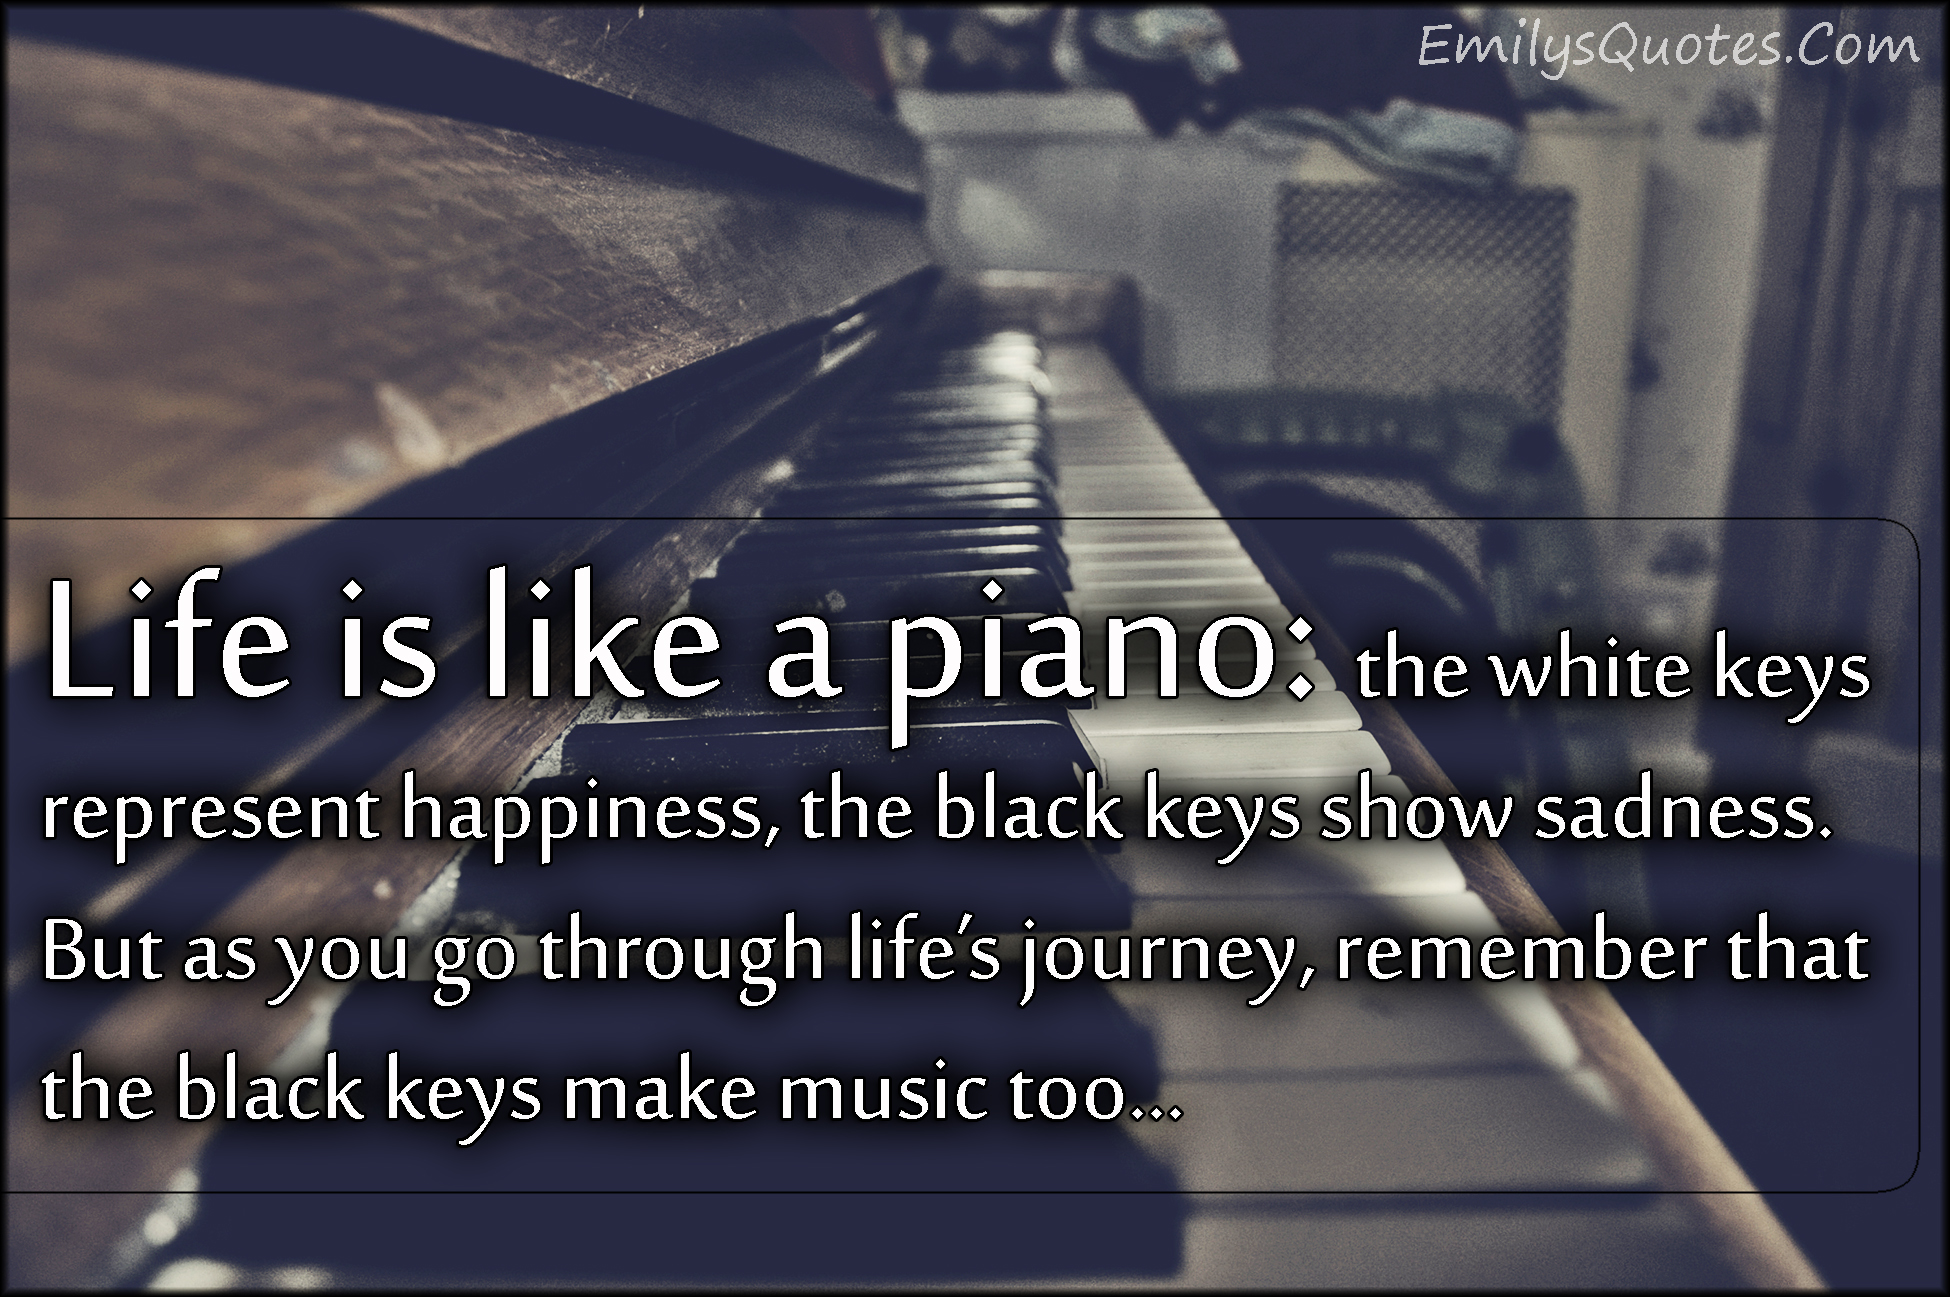 Life is like a piano: the white keys represent happiness, the black keys show sadness. But as you go through life’s journey, remember that the black keys make music too…